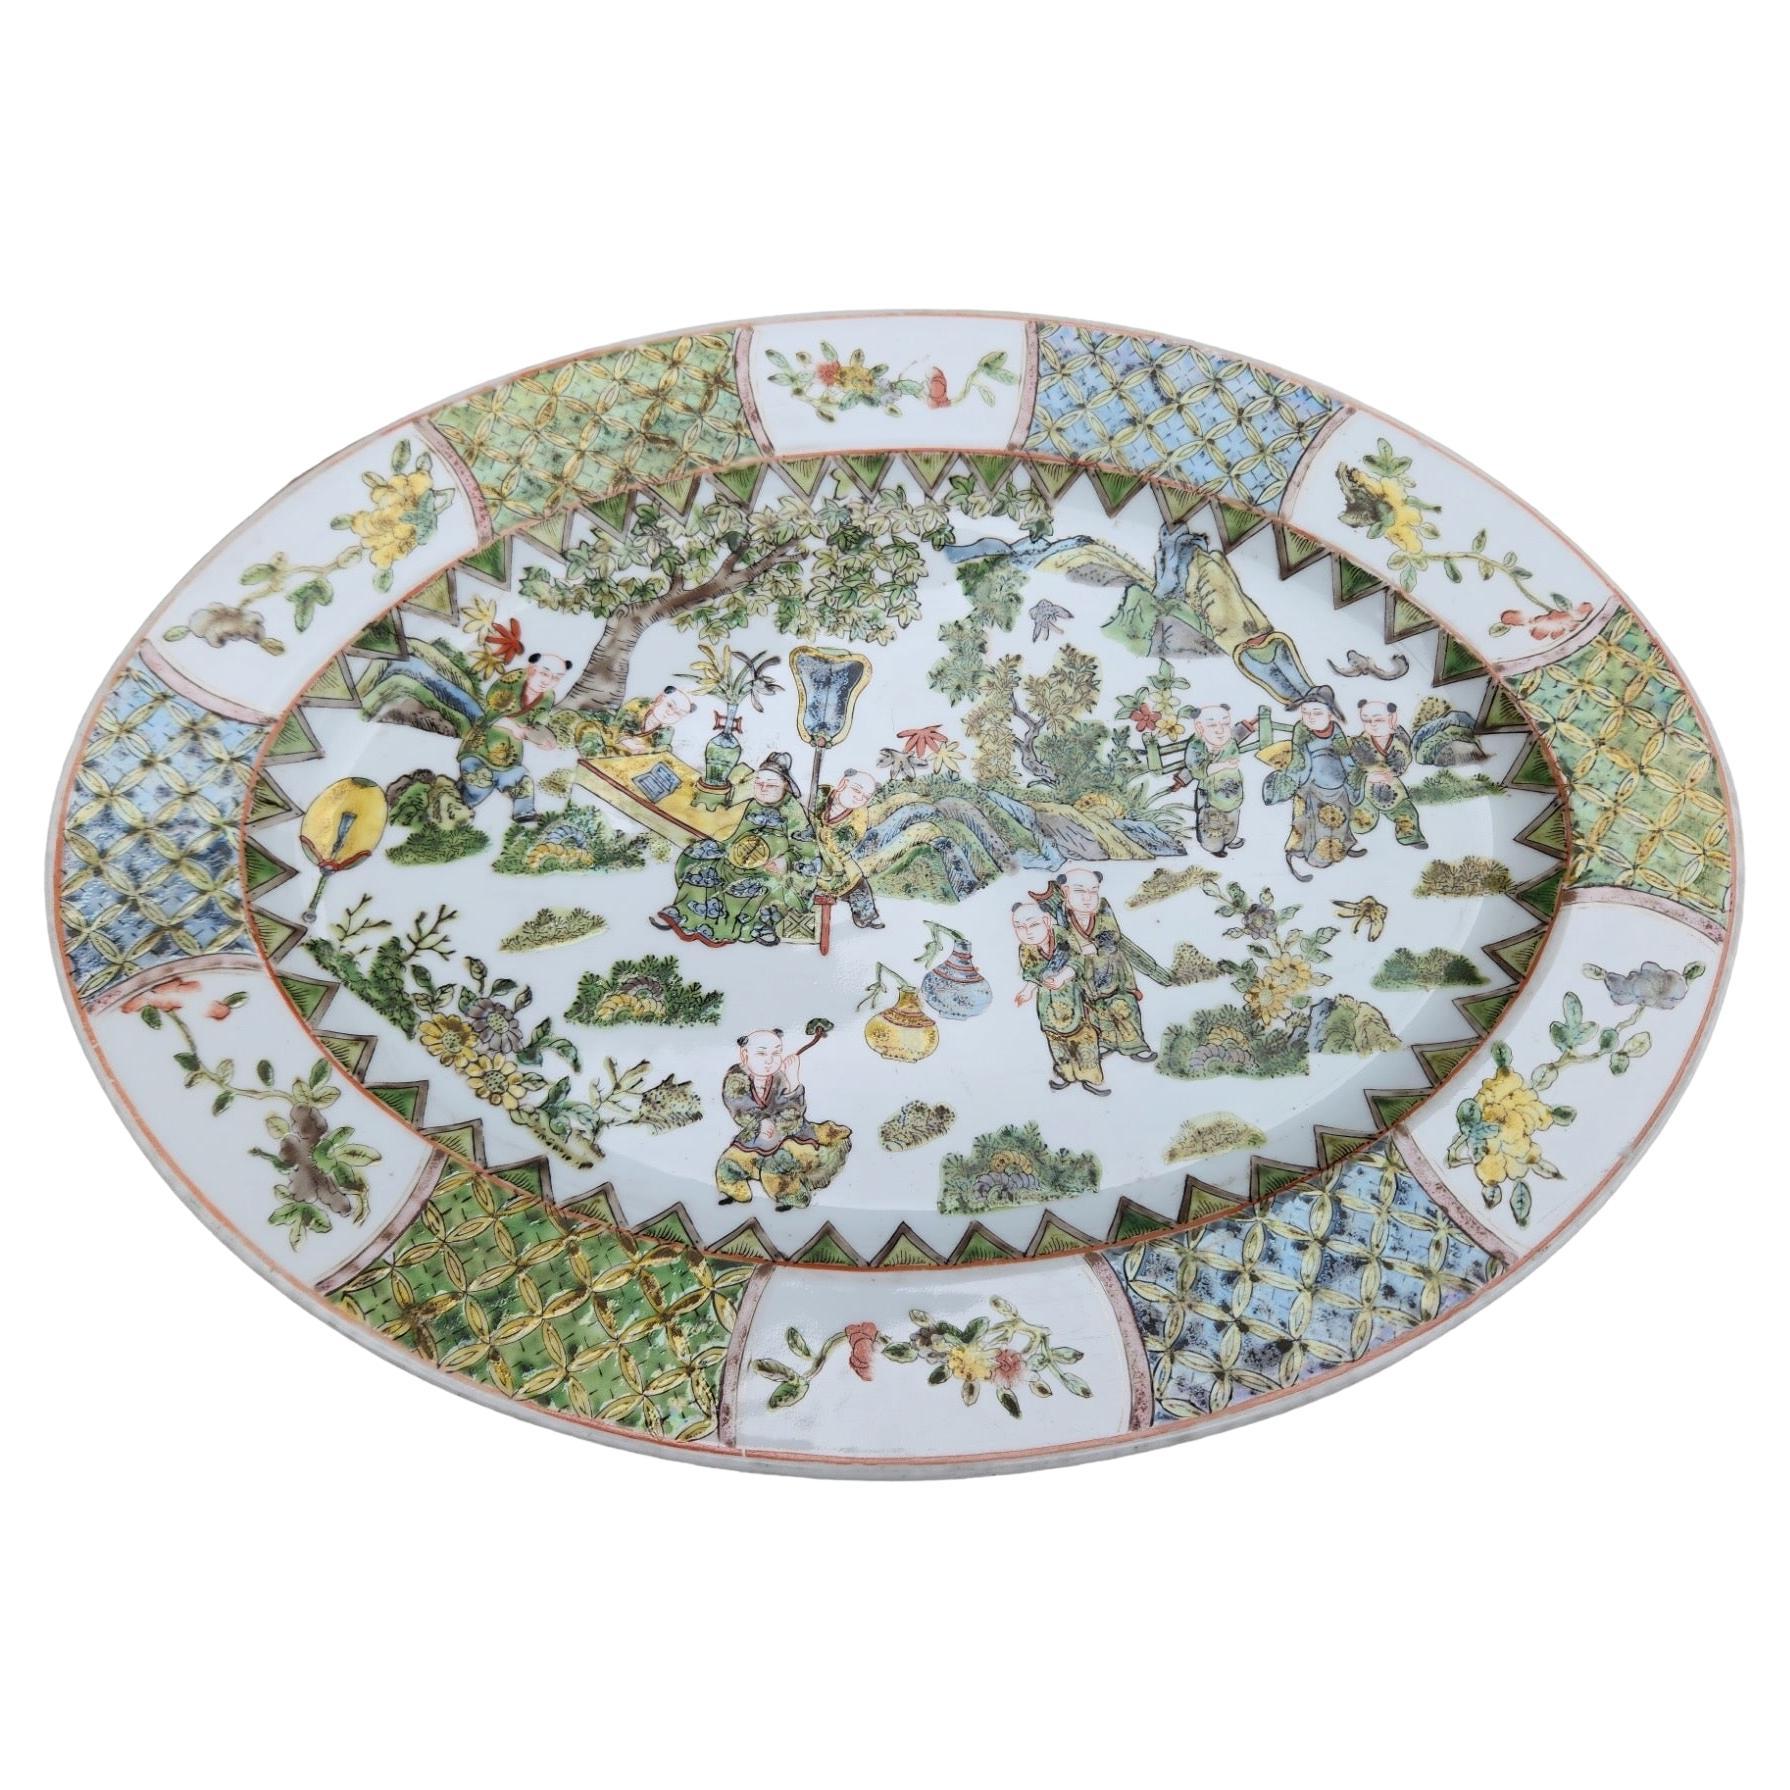 19th Century Chinese Export Oval Platter